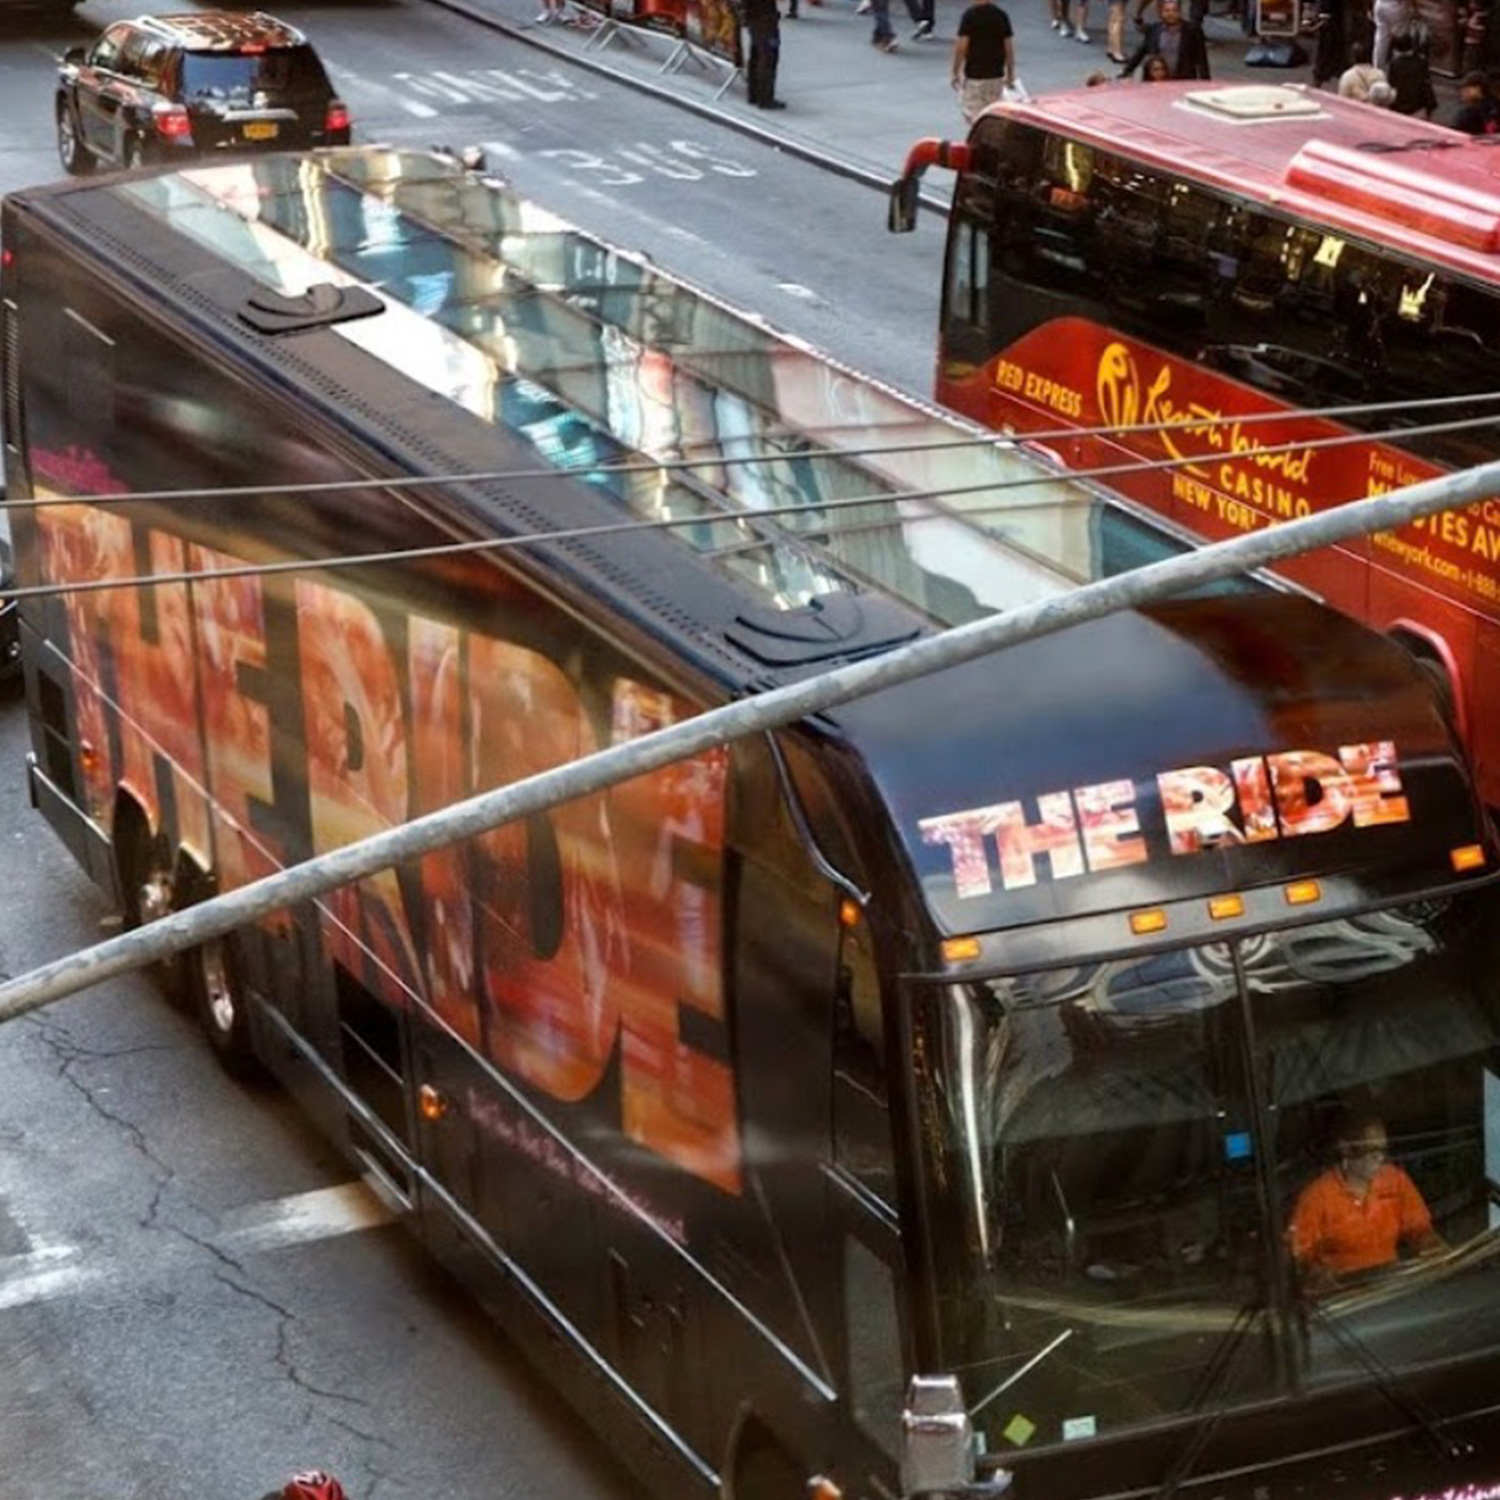 THE RIDE (NYC)